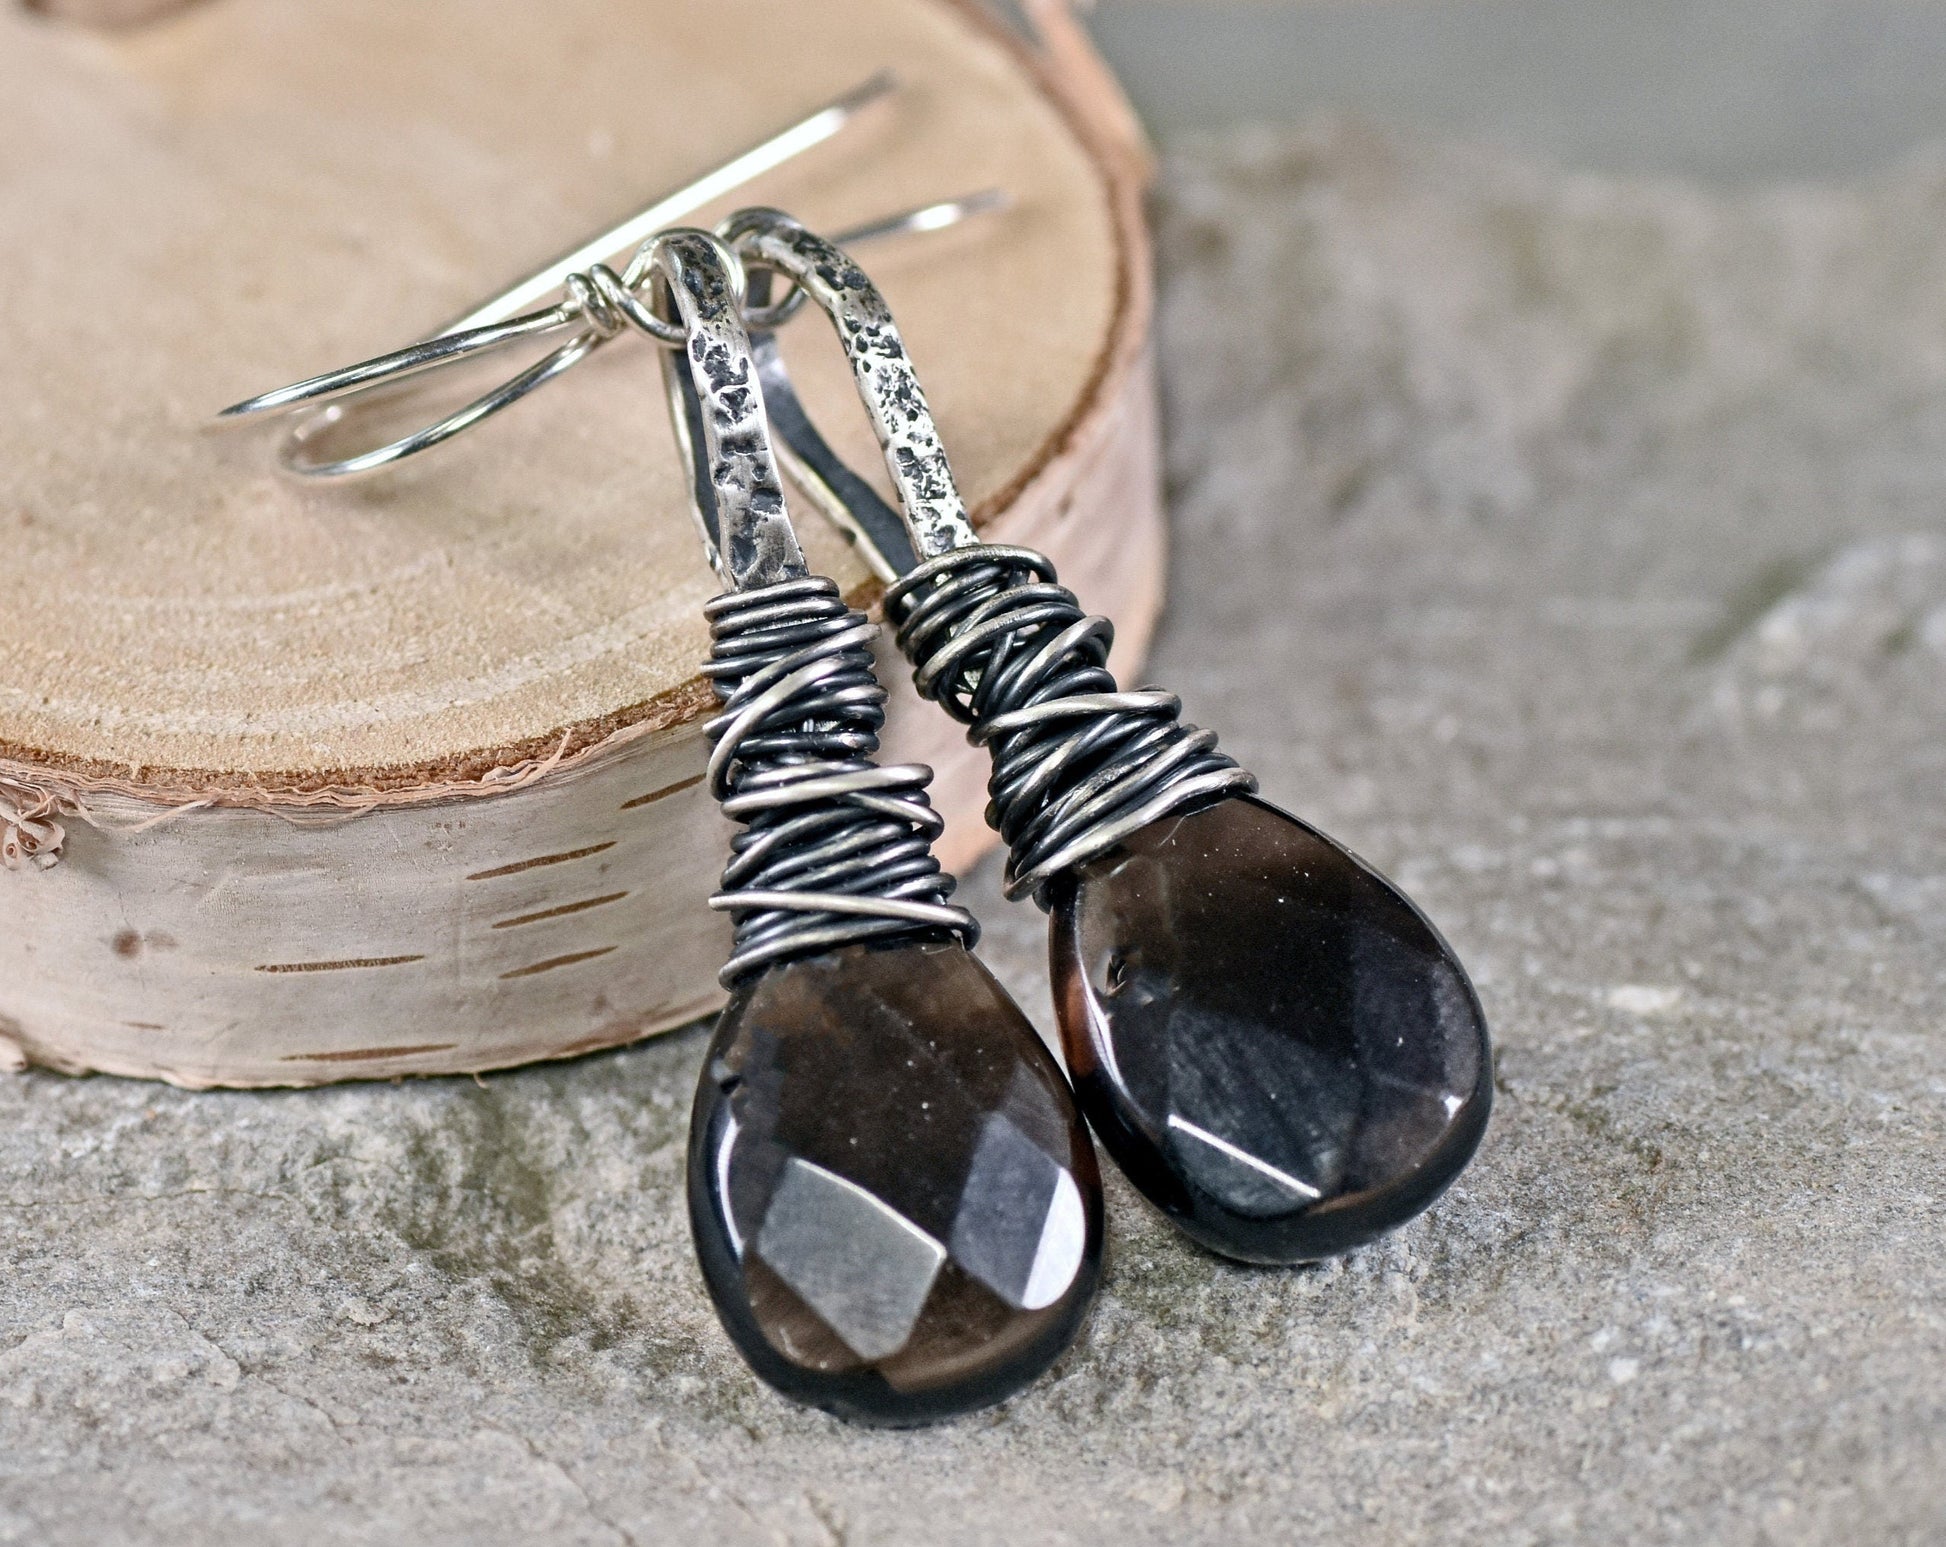 Smoky Quartz Teardrop Earrings Sterling Silver, Large Grey Faceted Gemstone Dangles, Messy Wire Wrap Natural Stone Jewelry Handmade